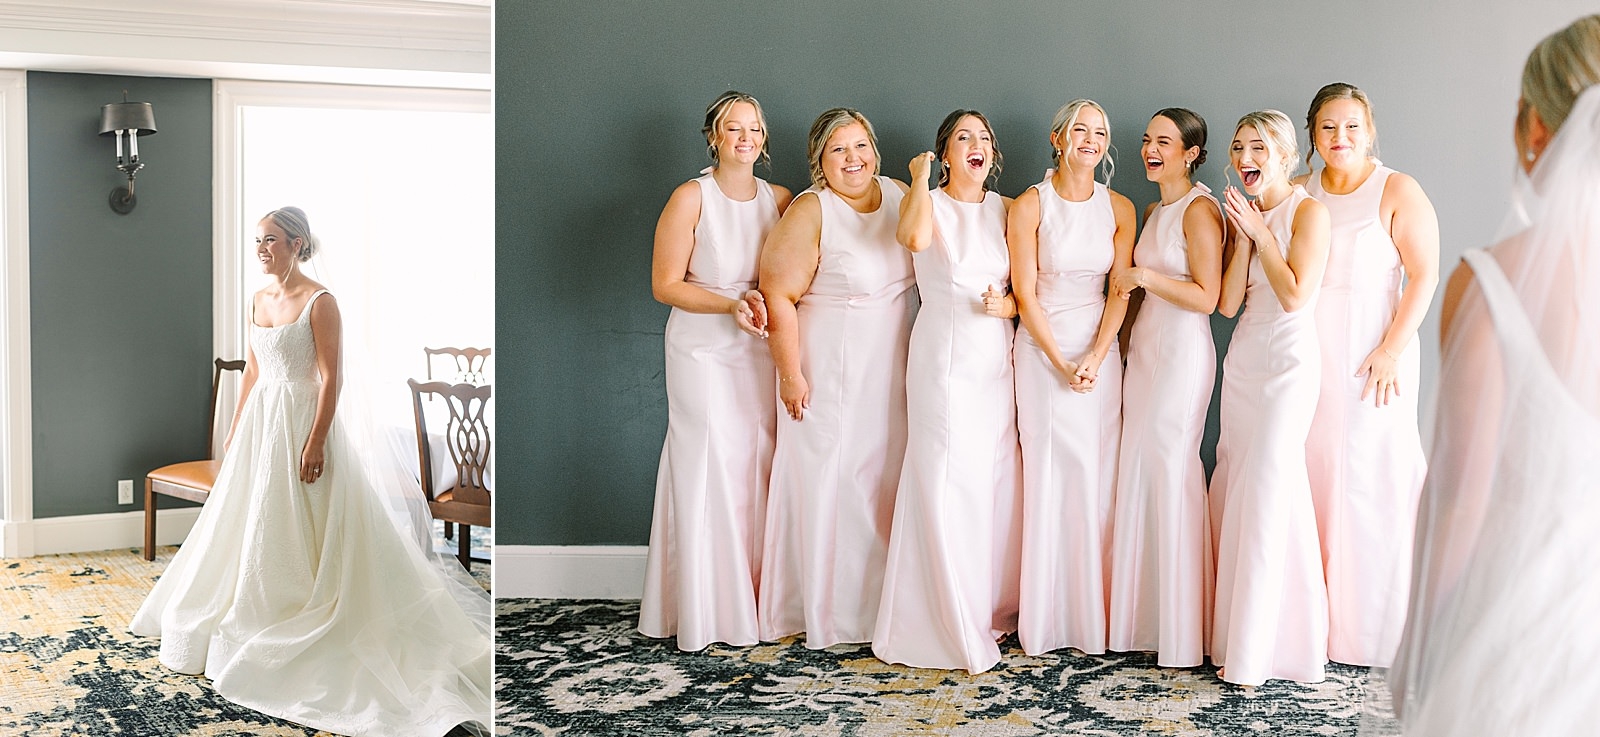 An Evansville Country Club Wedding | Ashley and Beau | Bret and Brandie Photography054.jpg